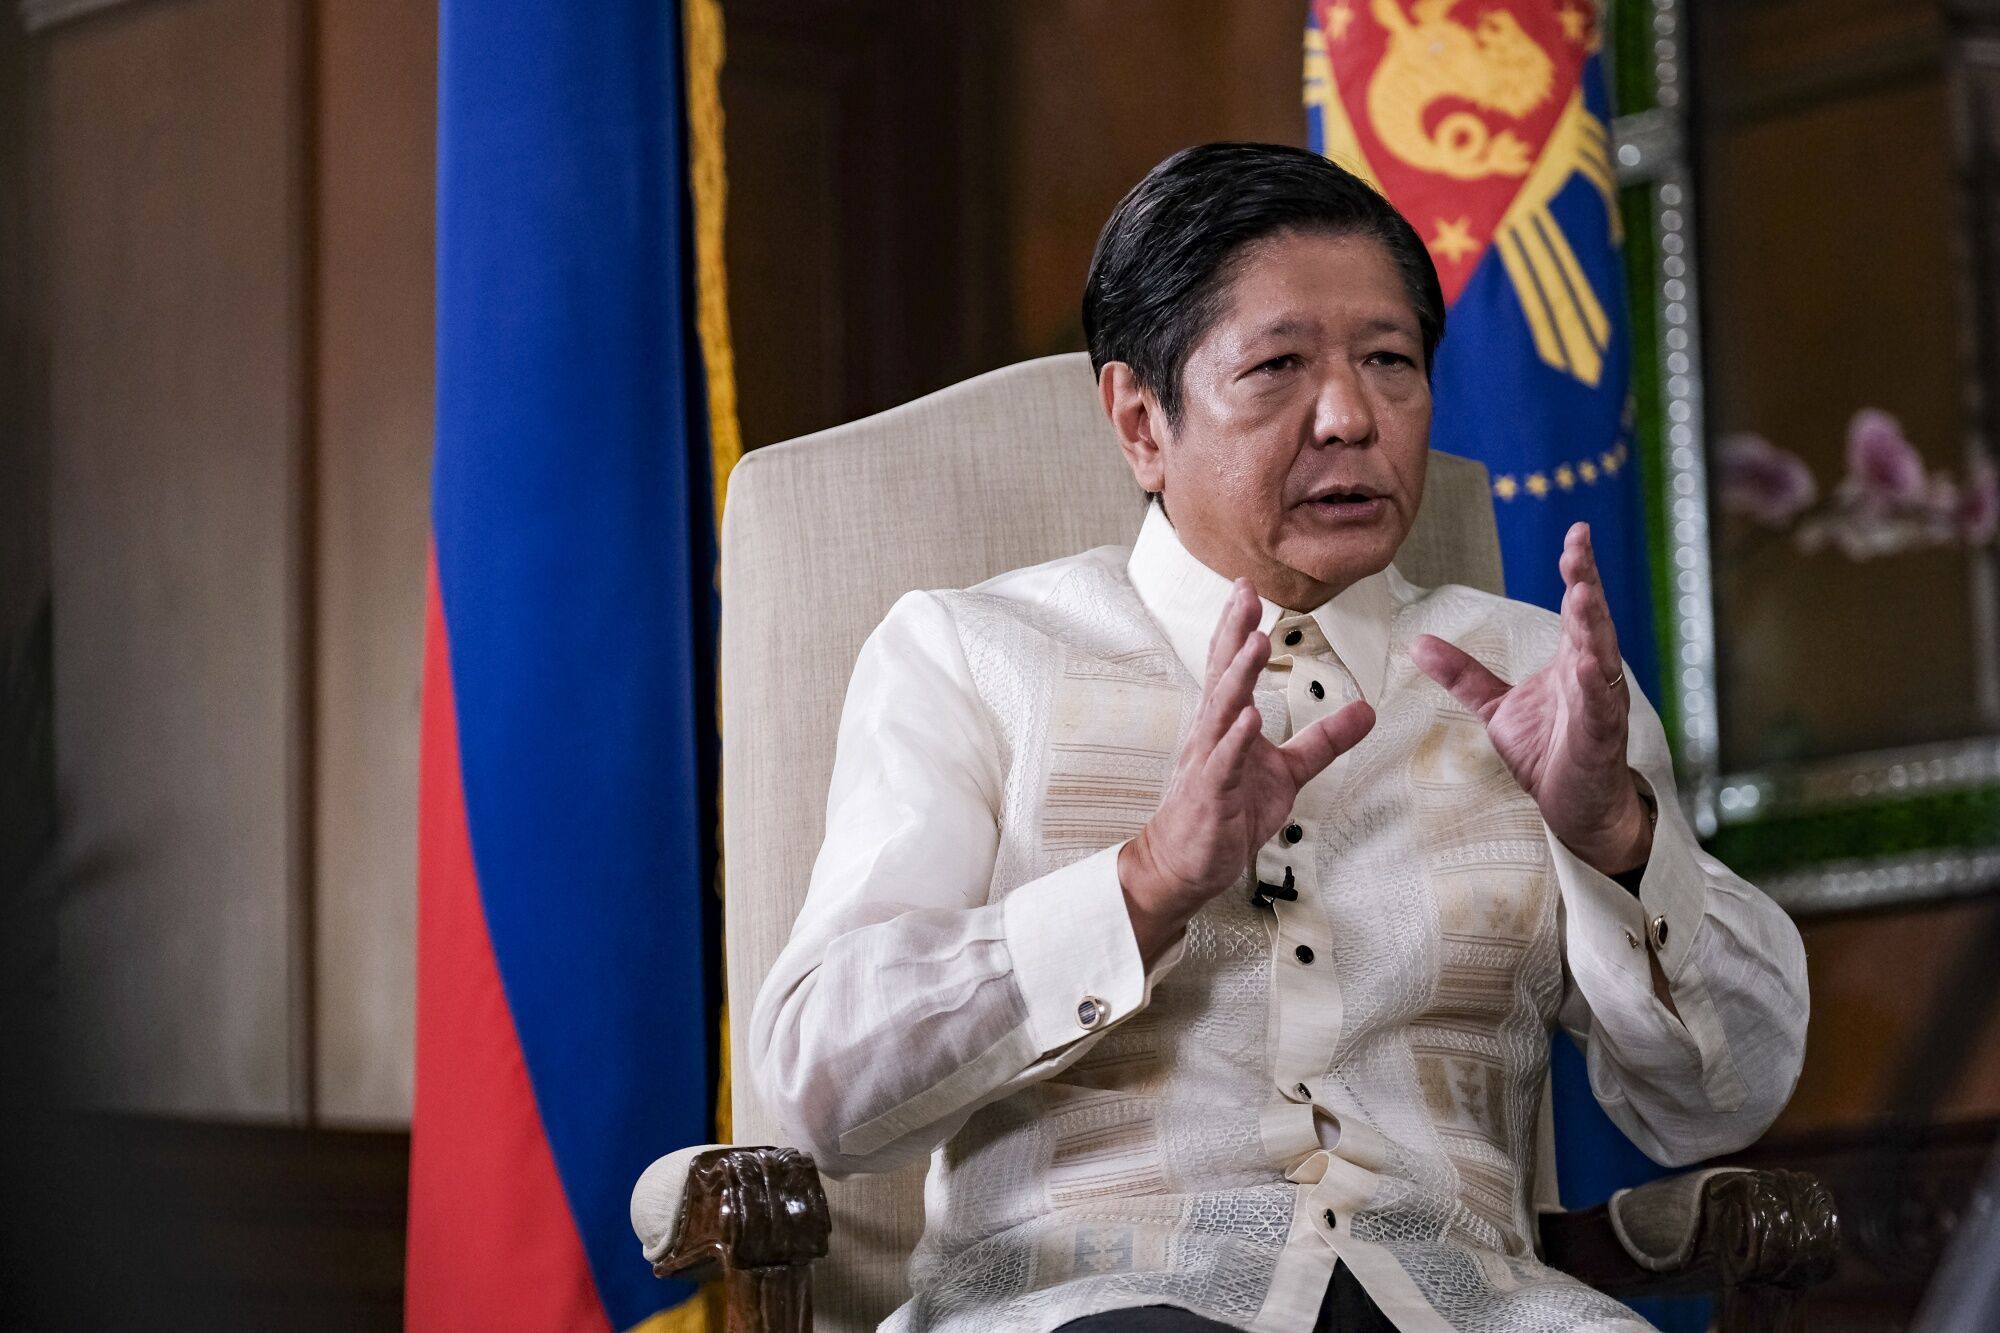 President Ferdinand Marcos Jnr said the Philippines will not be “cowed into silence” by Beijing after confrontations in the South China Sea that injured Filipino troops and damaged vessels. Photo: Bloomberg